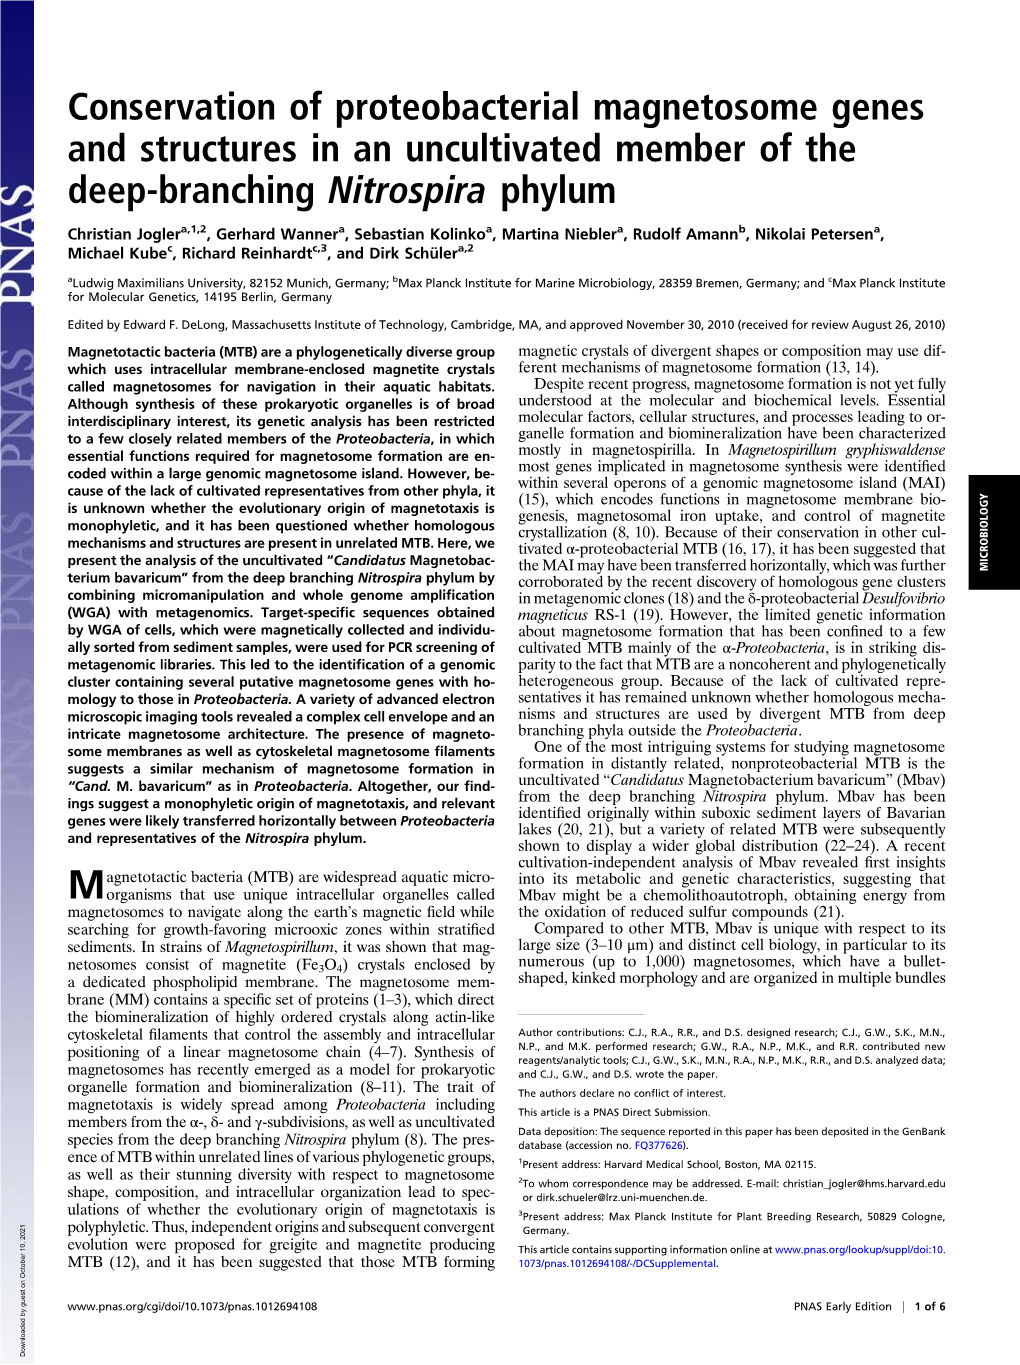 Conservation of Proteobacterial Magnetosome Genes and Structures in an Uncultivated Member of the Deep-Branching Nitrospira Phylum